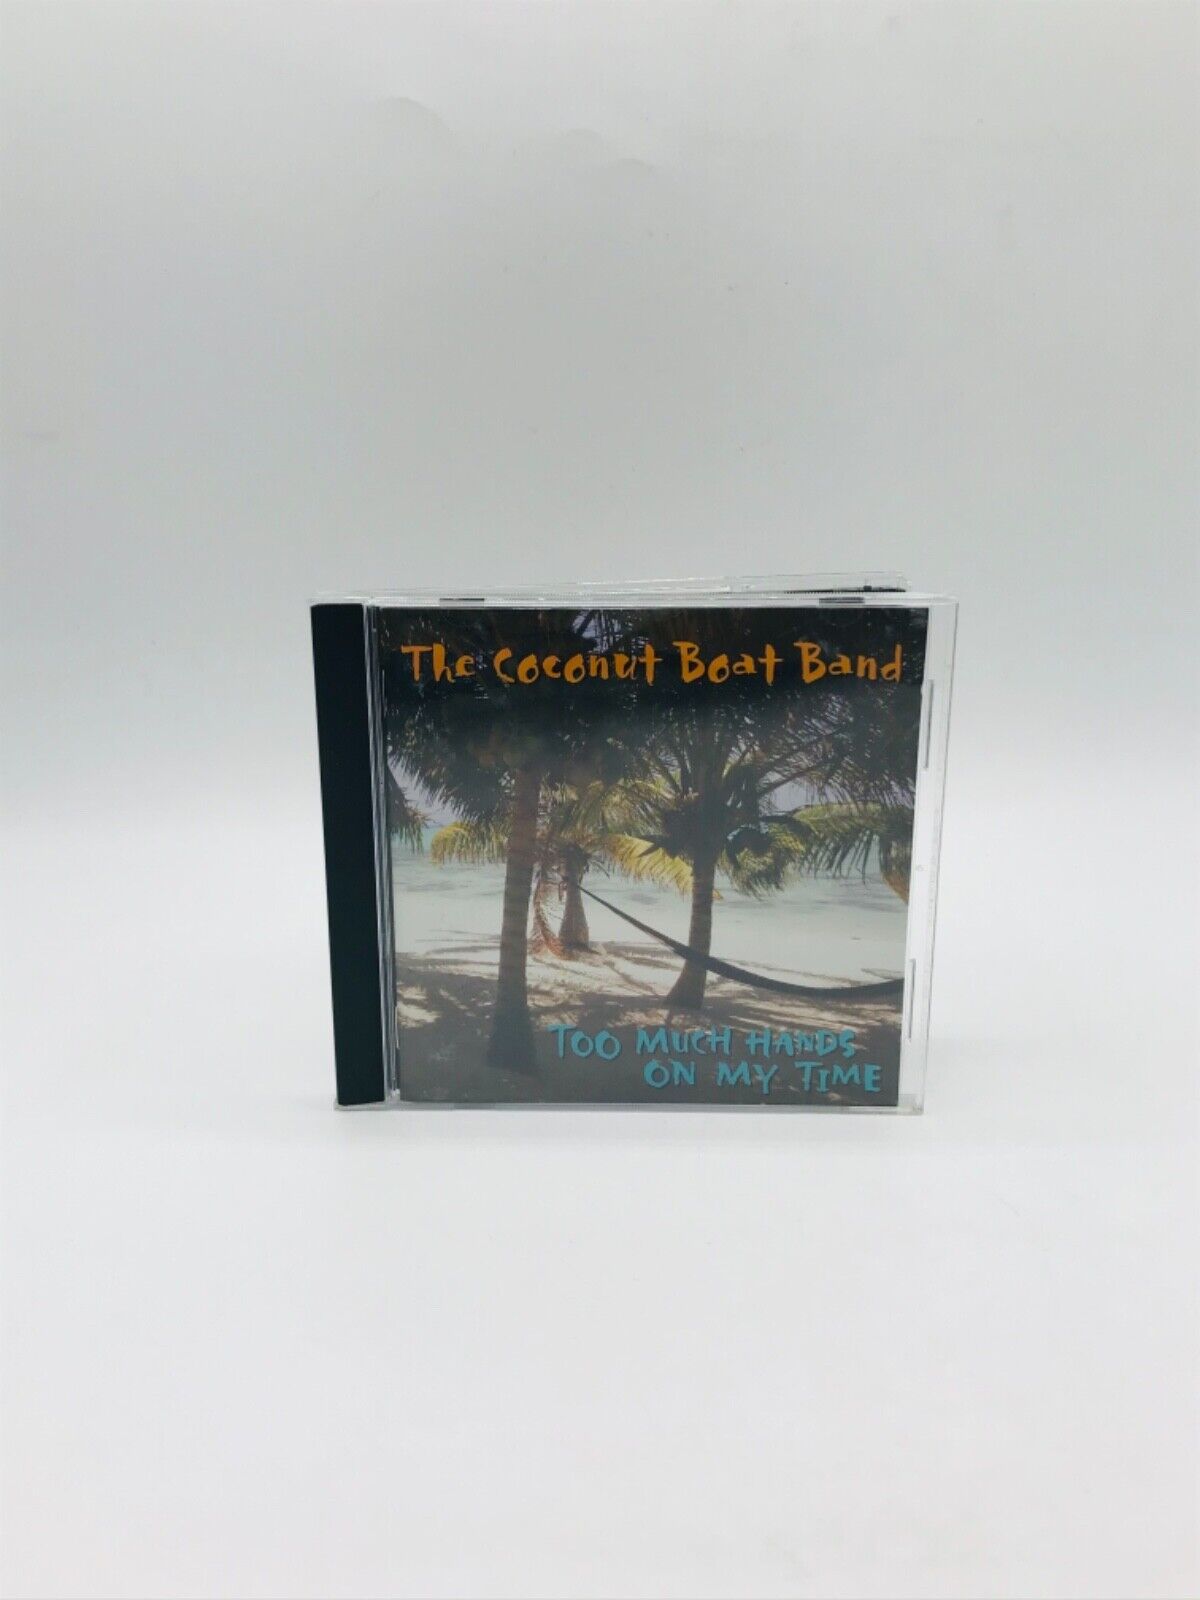 Too Much Hands on My Time by The Coconut Boat Band (CD, 2008)